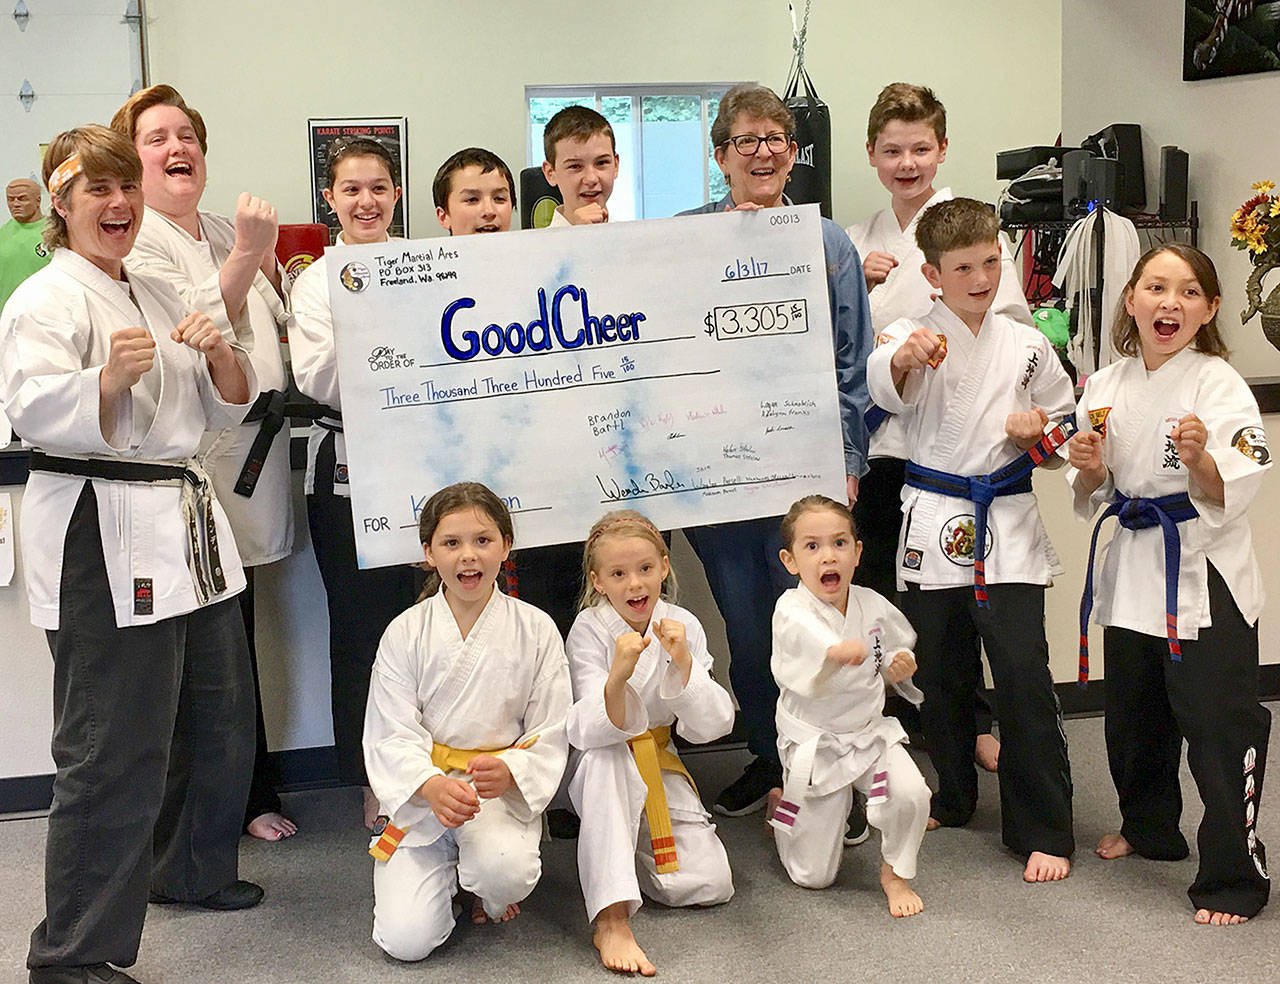 Contributed photo — Back row, from left to right: Sensei Wendi Barker, Michelle Durr, Makenna Parsell, Waylan Parsell, Jack Cussen, Kathy McLaughlin McCabe, Aidan Cussen, Magnus Christensen, Olivia Livingstone. Front row, from left to right: Adelynn Franks, Logan Schnobrich and Aleah Livingstone.